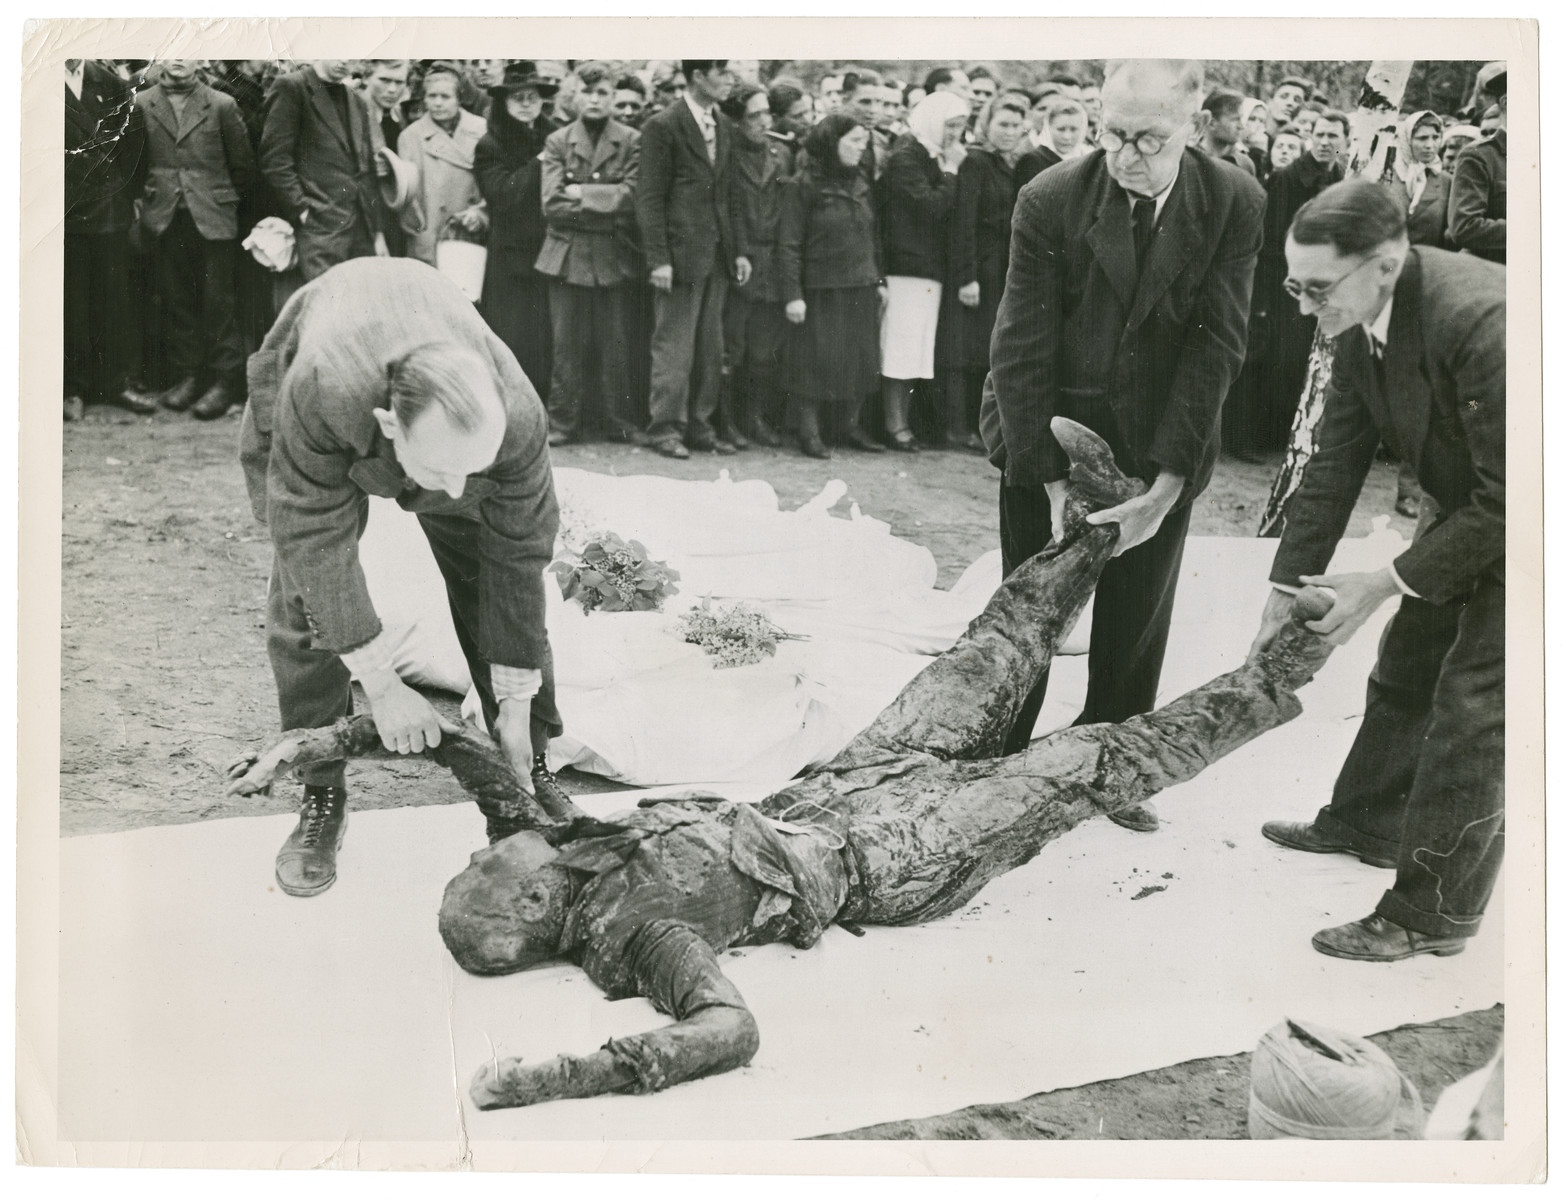 German civilians rebury the exhumed corpses of Russian prisoners.

Original caption reads:  "German civilians place the exhumed body of a Russian prisoner on a white sheet of decent burial.  The bodies of other victims lie enshrouded and covered with flowers in the background".